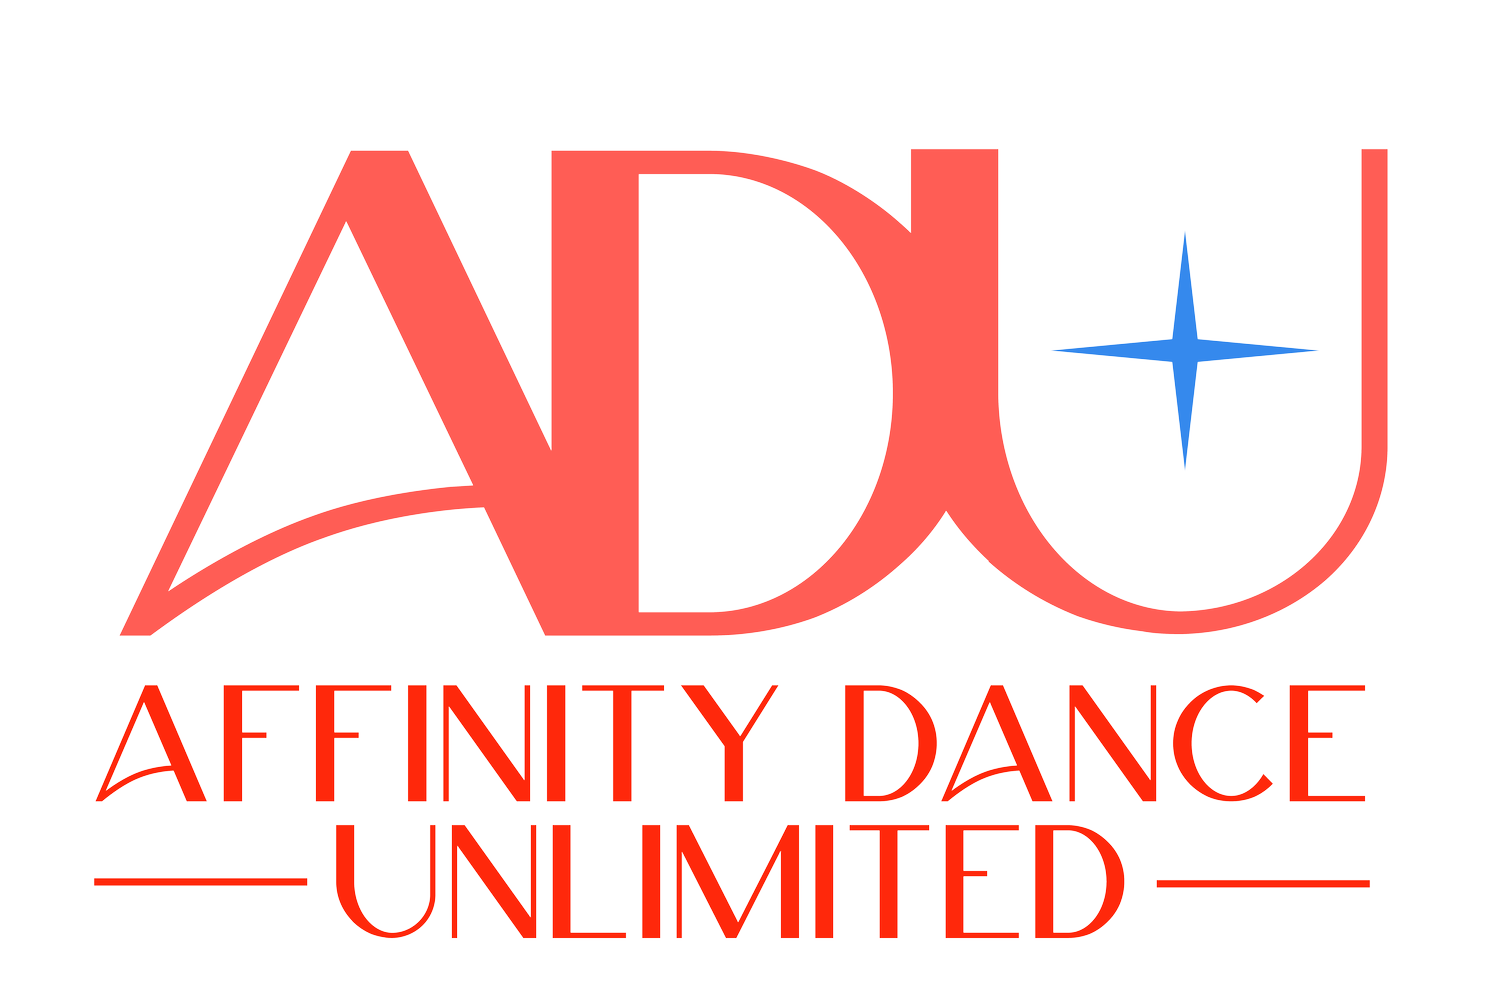 Affinity Dance Unlimited